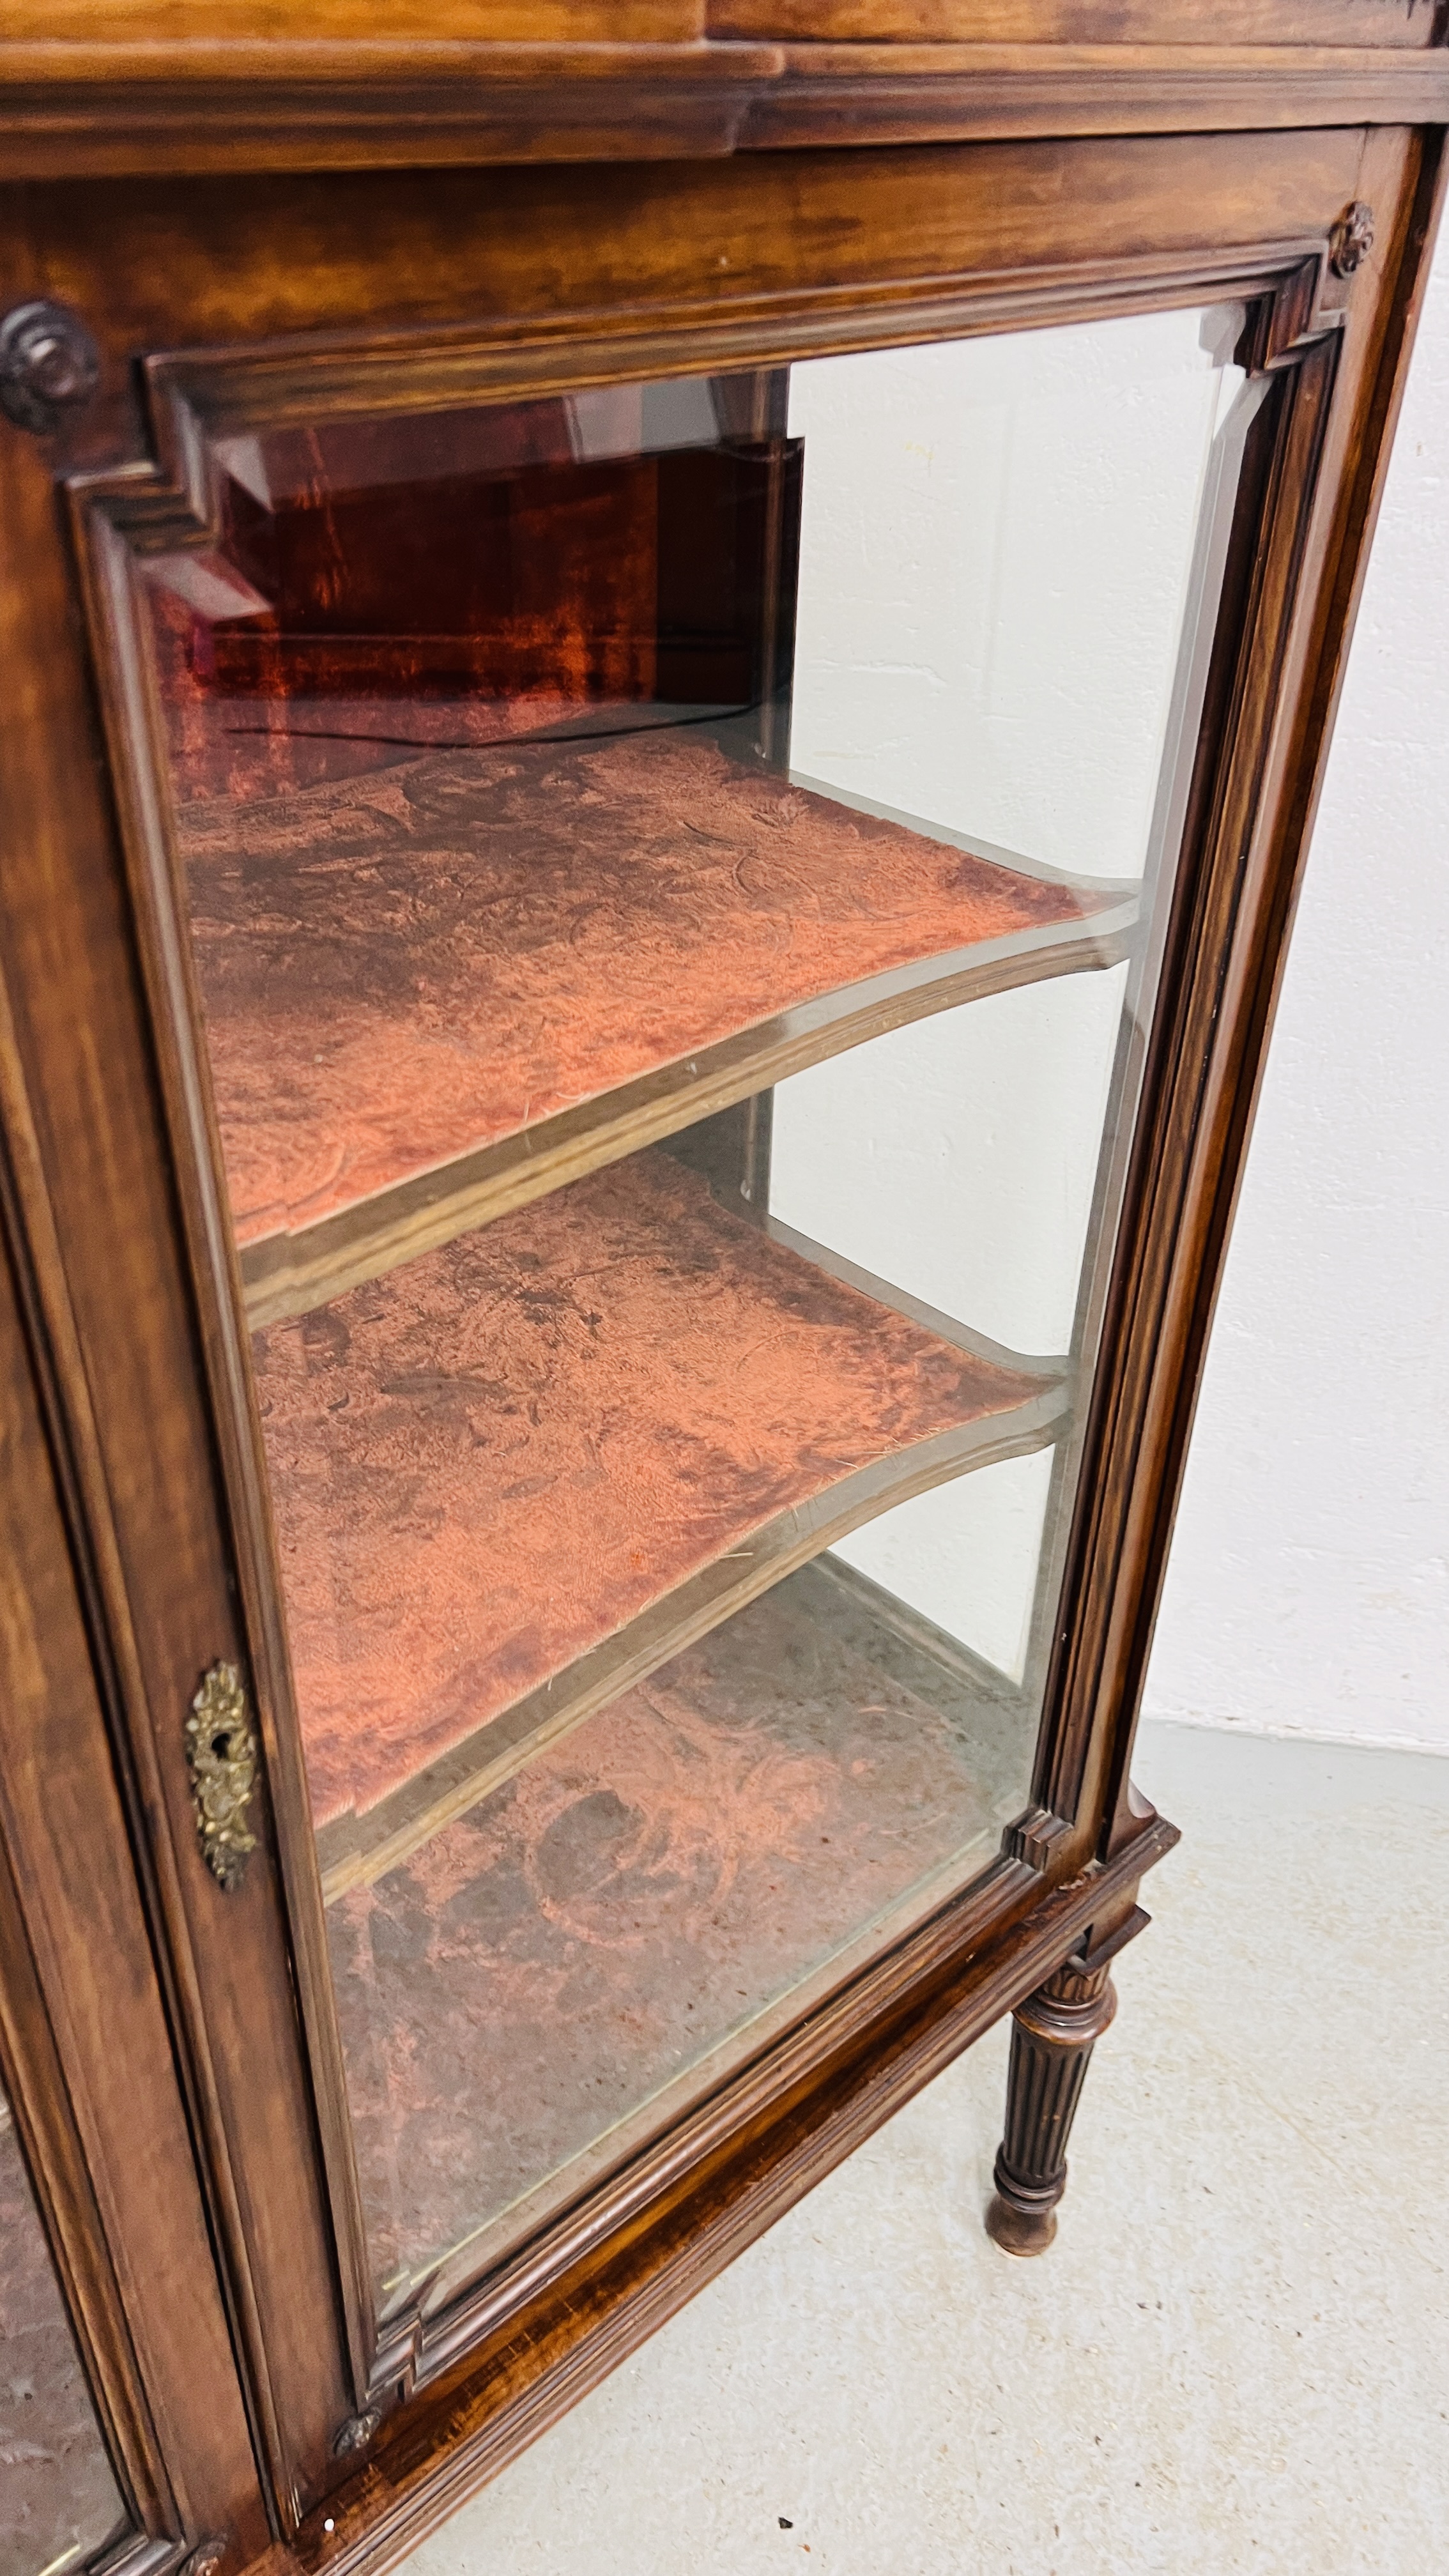 ANTIQUE MAHOGANY TWO DOOR GLAZED DISPLAY CABINET WITH VELVET UPHOLSTERED SHELVES STANDING ON REEDED - Image 12 of 14